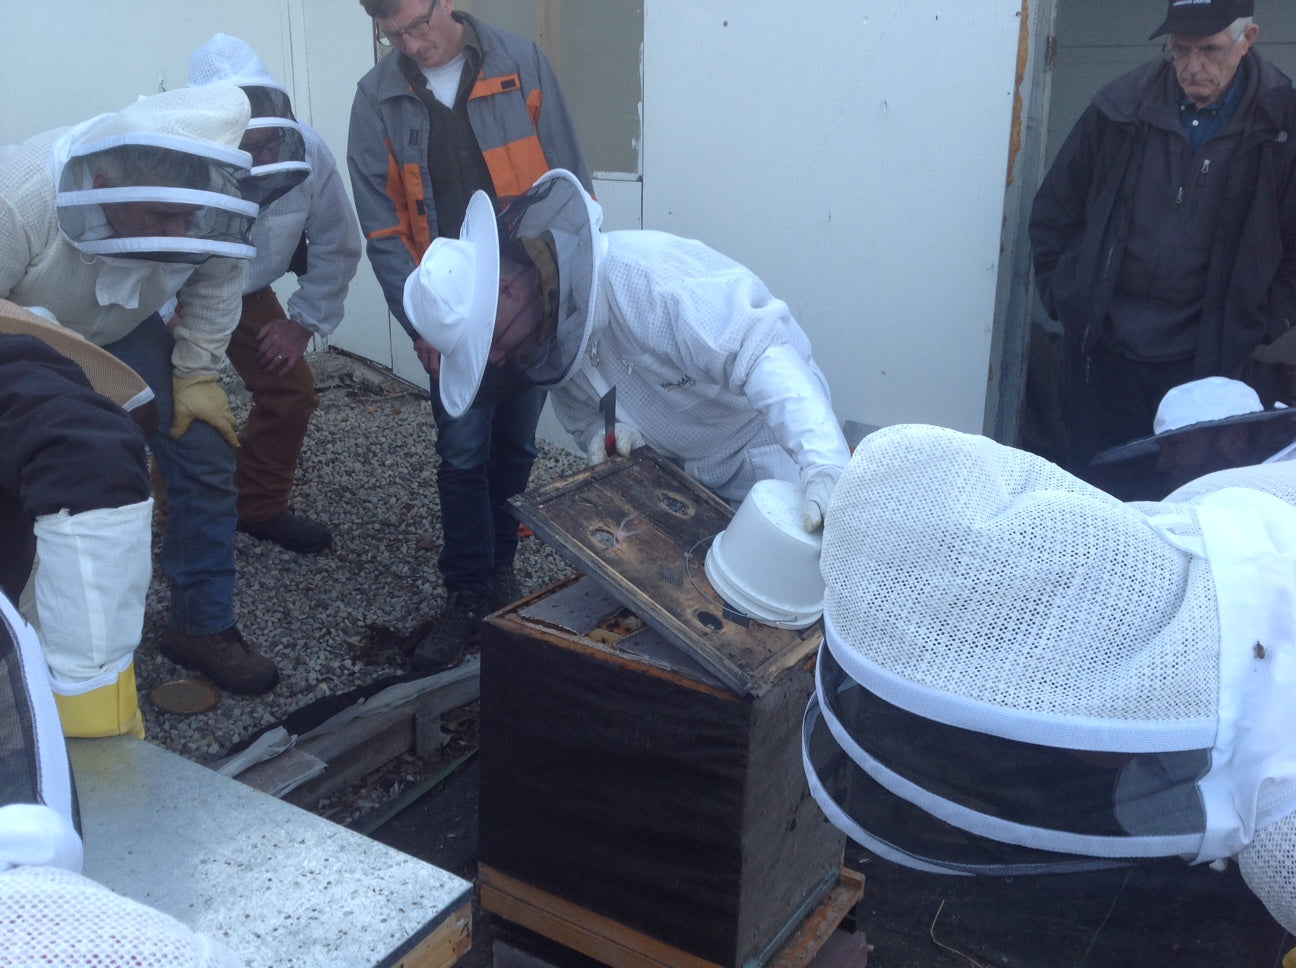 Practical sessions help beginner and experienced beekeepers